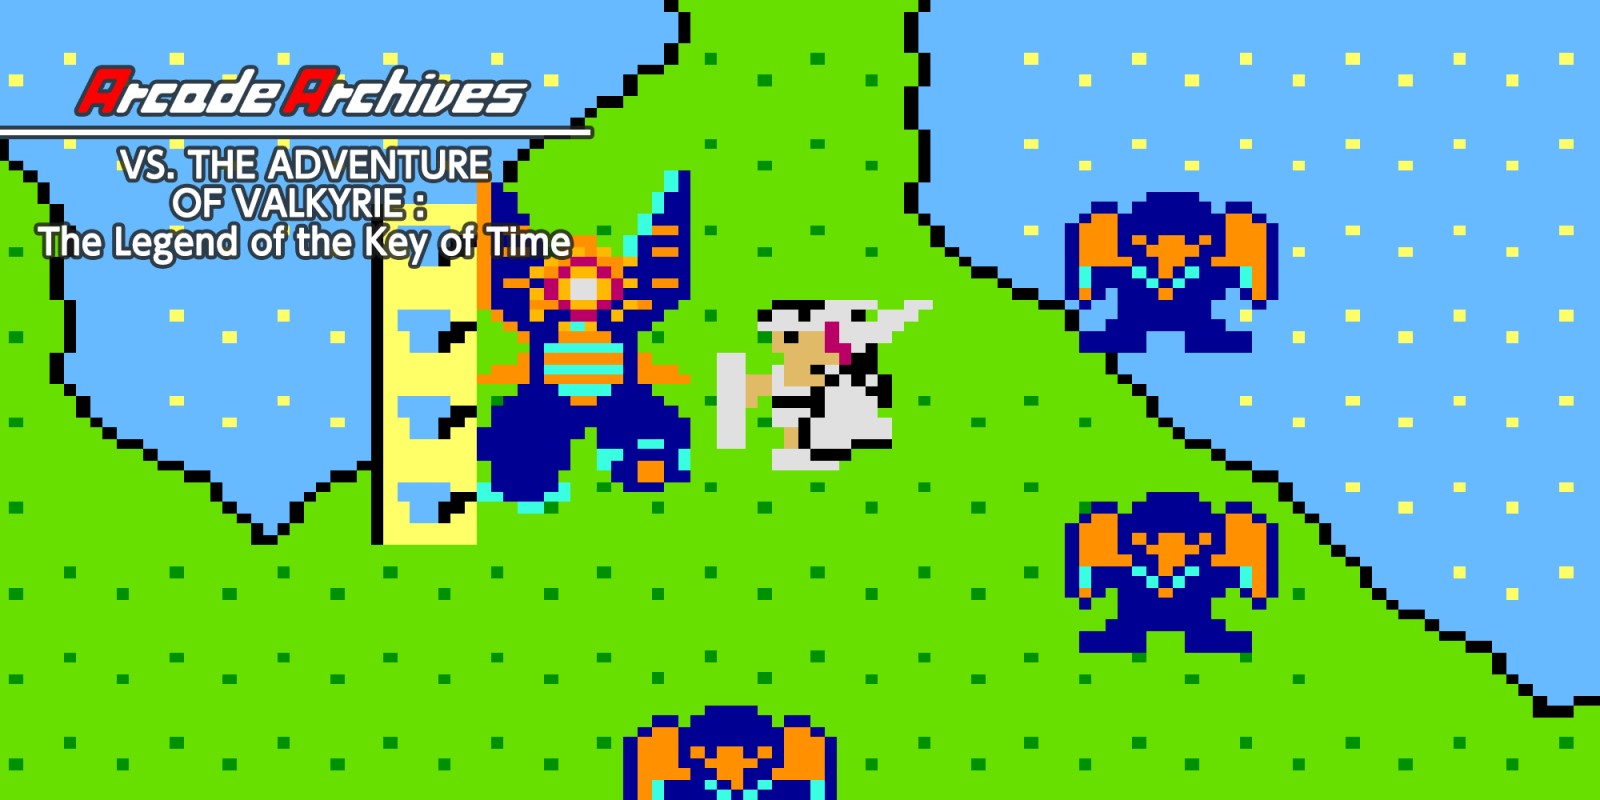 Arcade Archives VS. THE ADVENTURE OF VALKYRIE : The Legend of the Key of Time